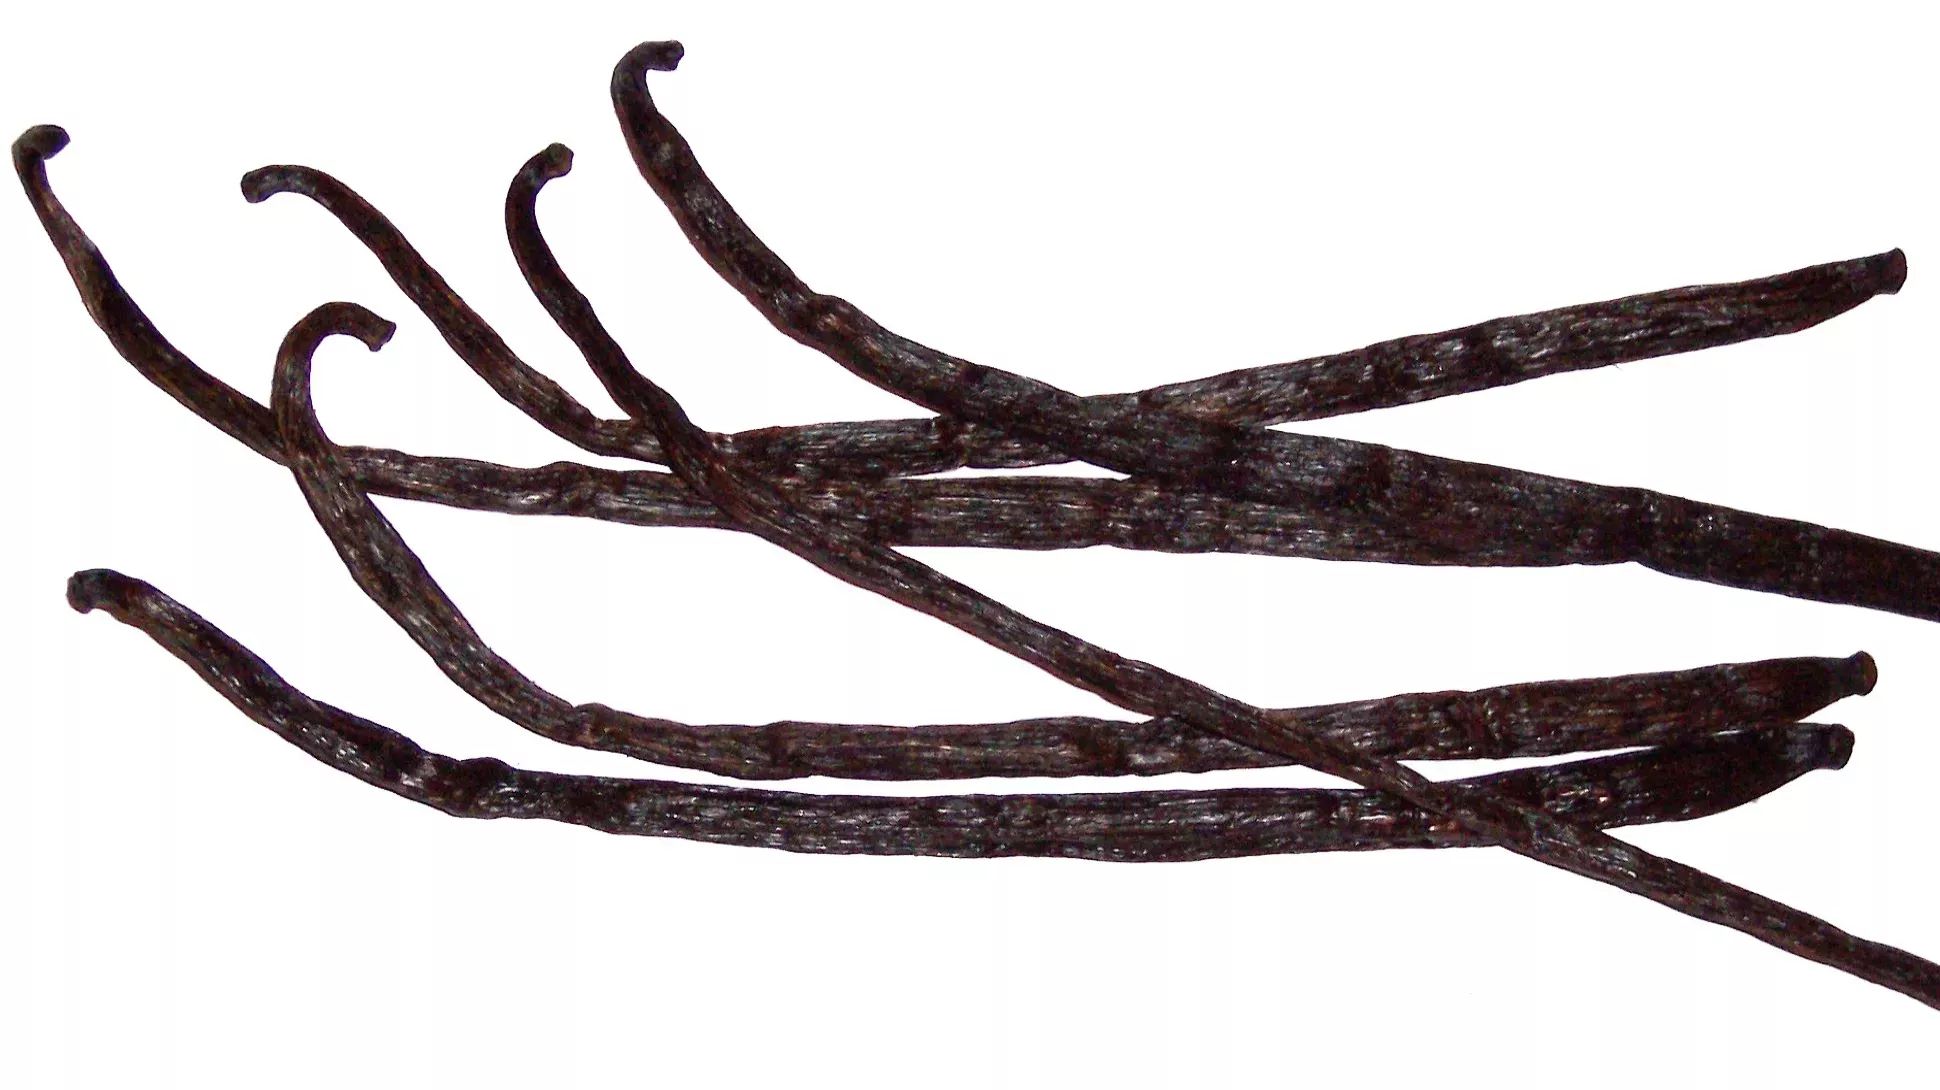 Long dark brown seed pods from vanilla orchids sometimes called beans